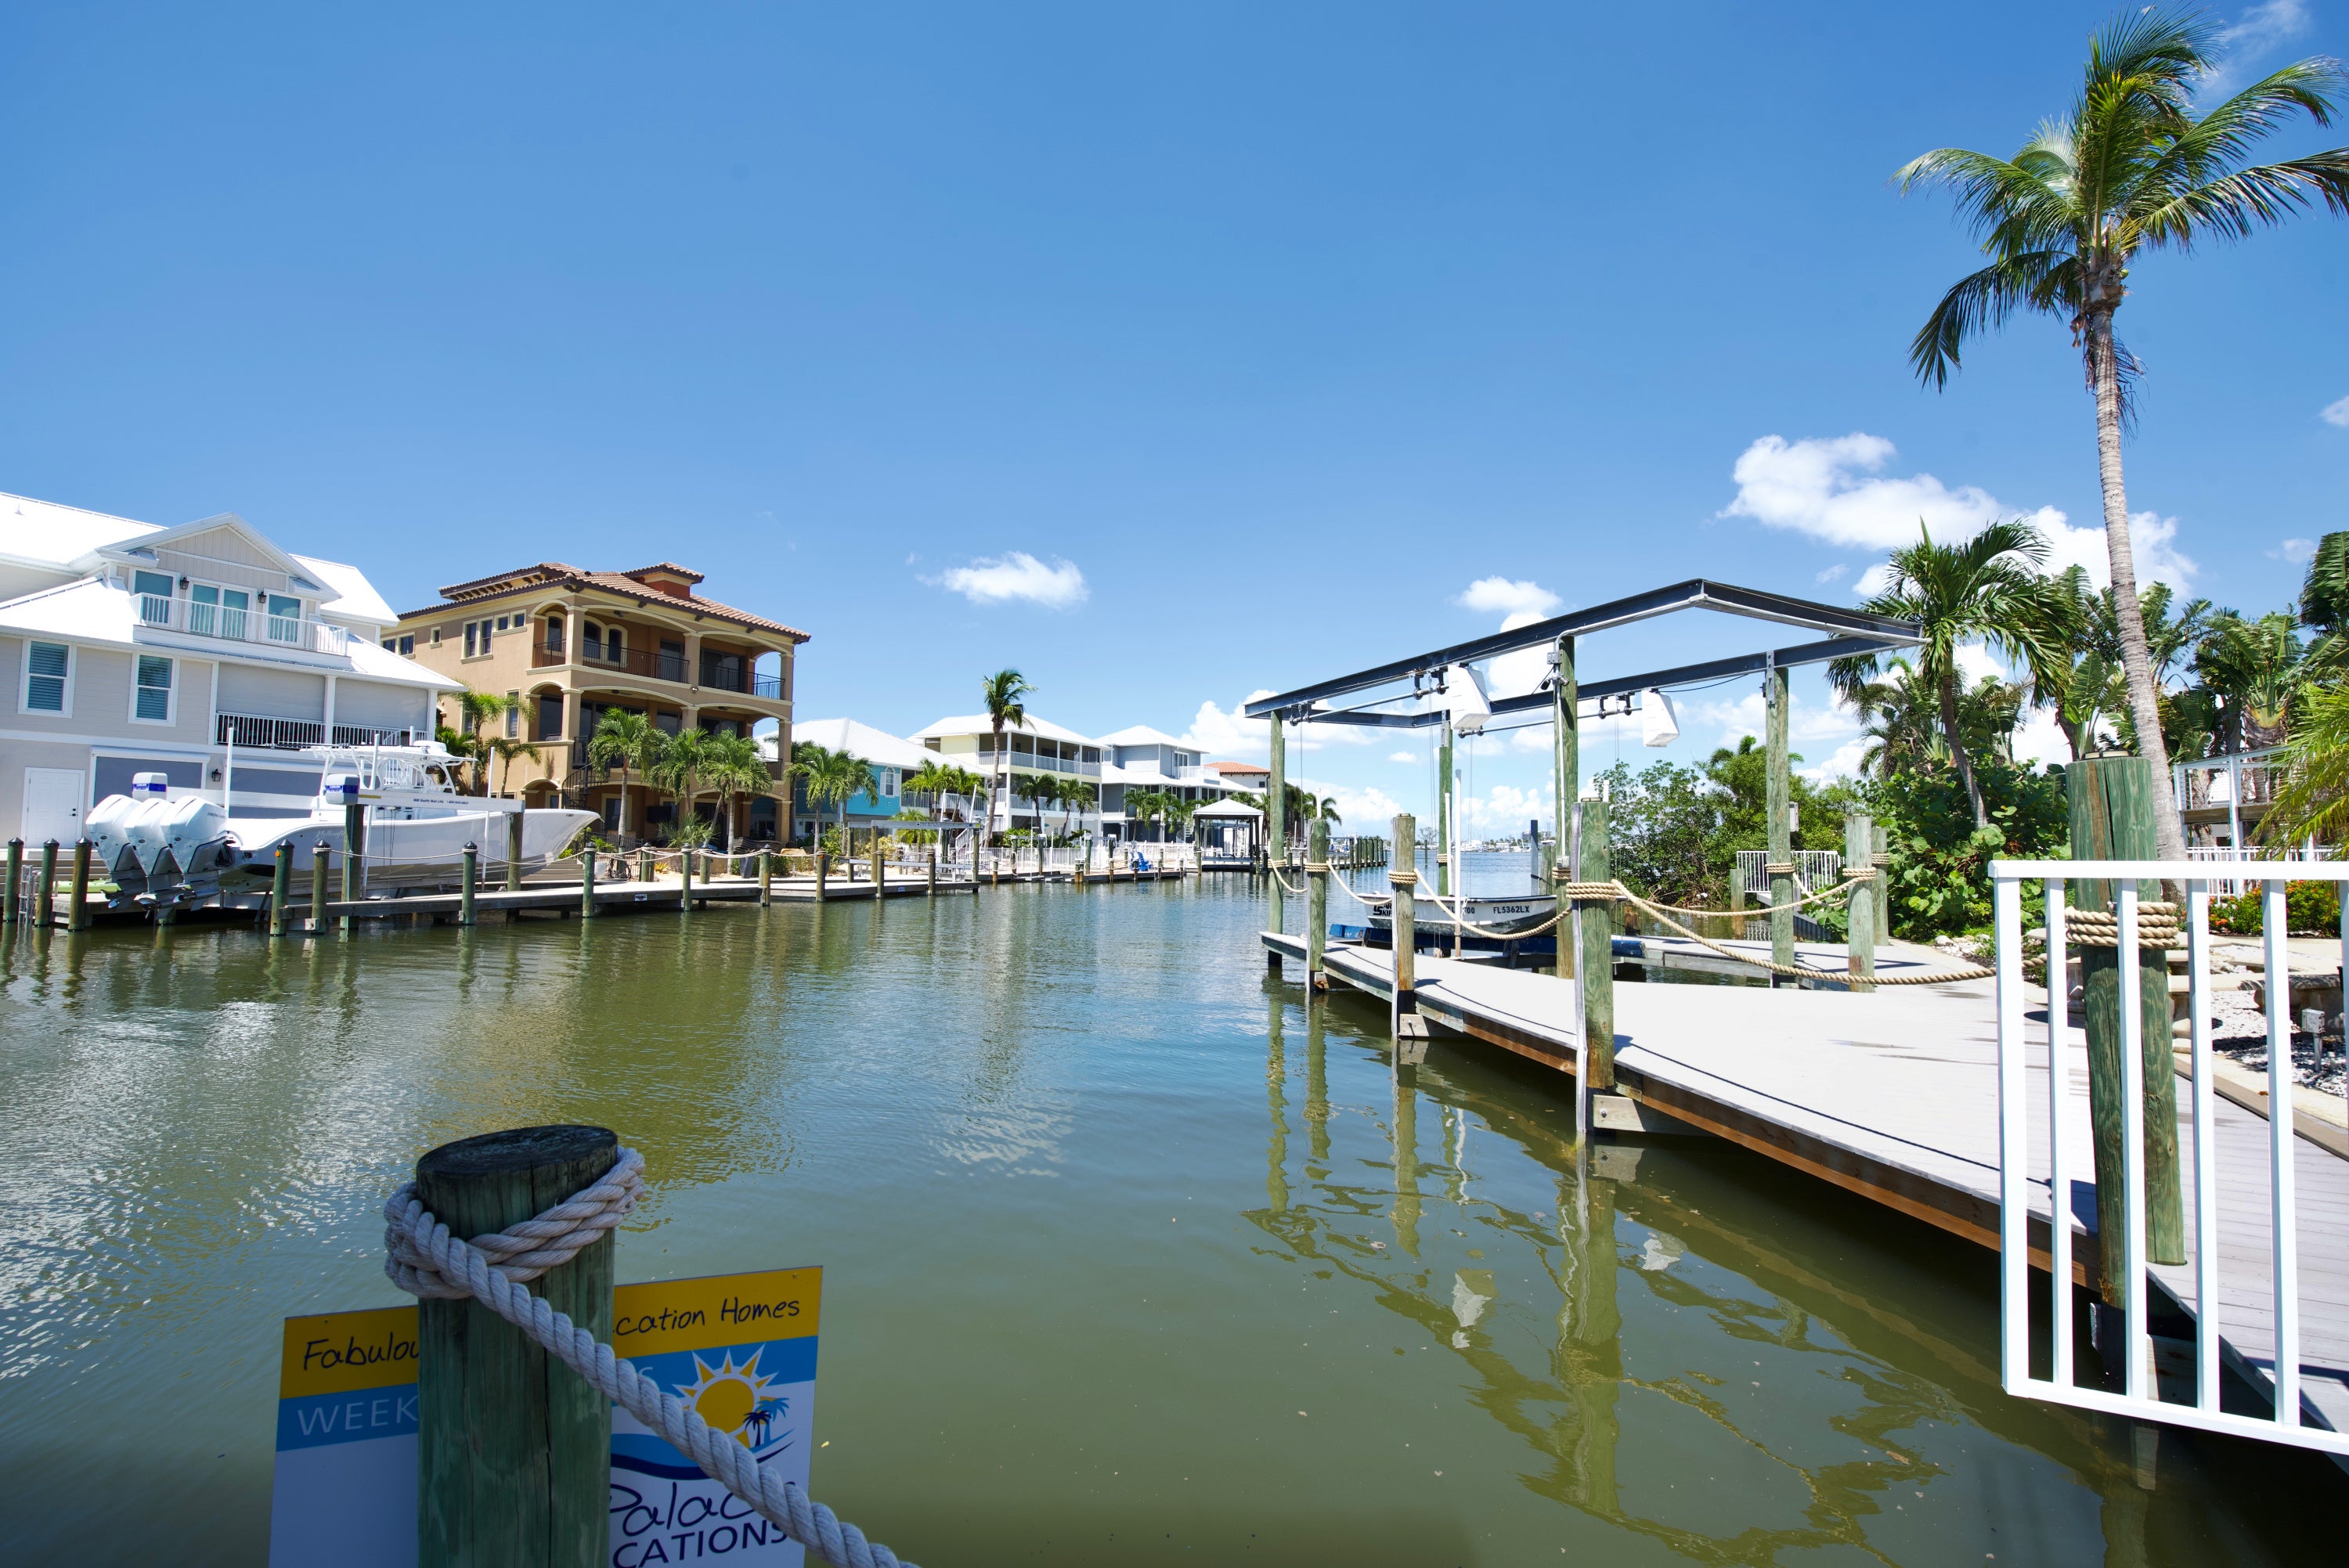 View from dock on canal to Estero Bay